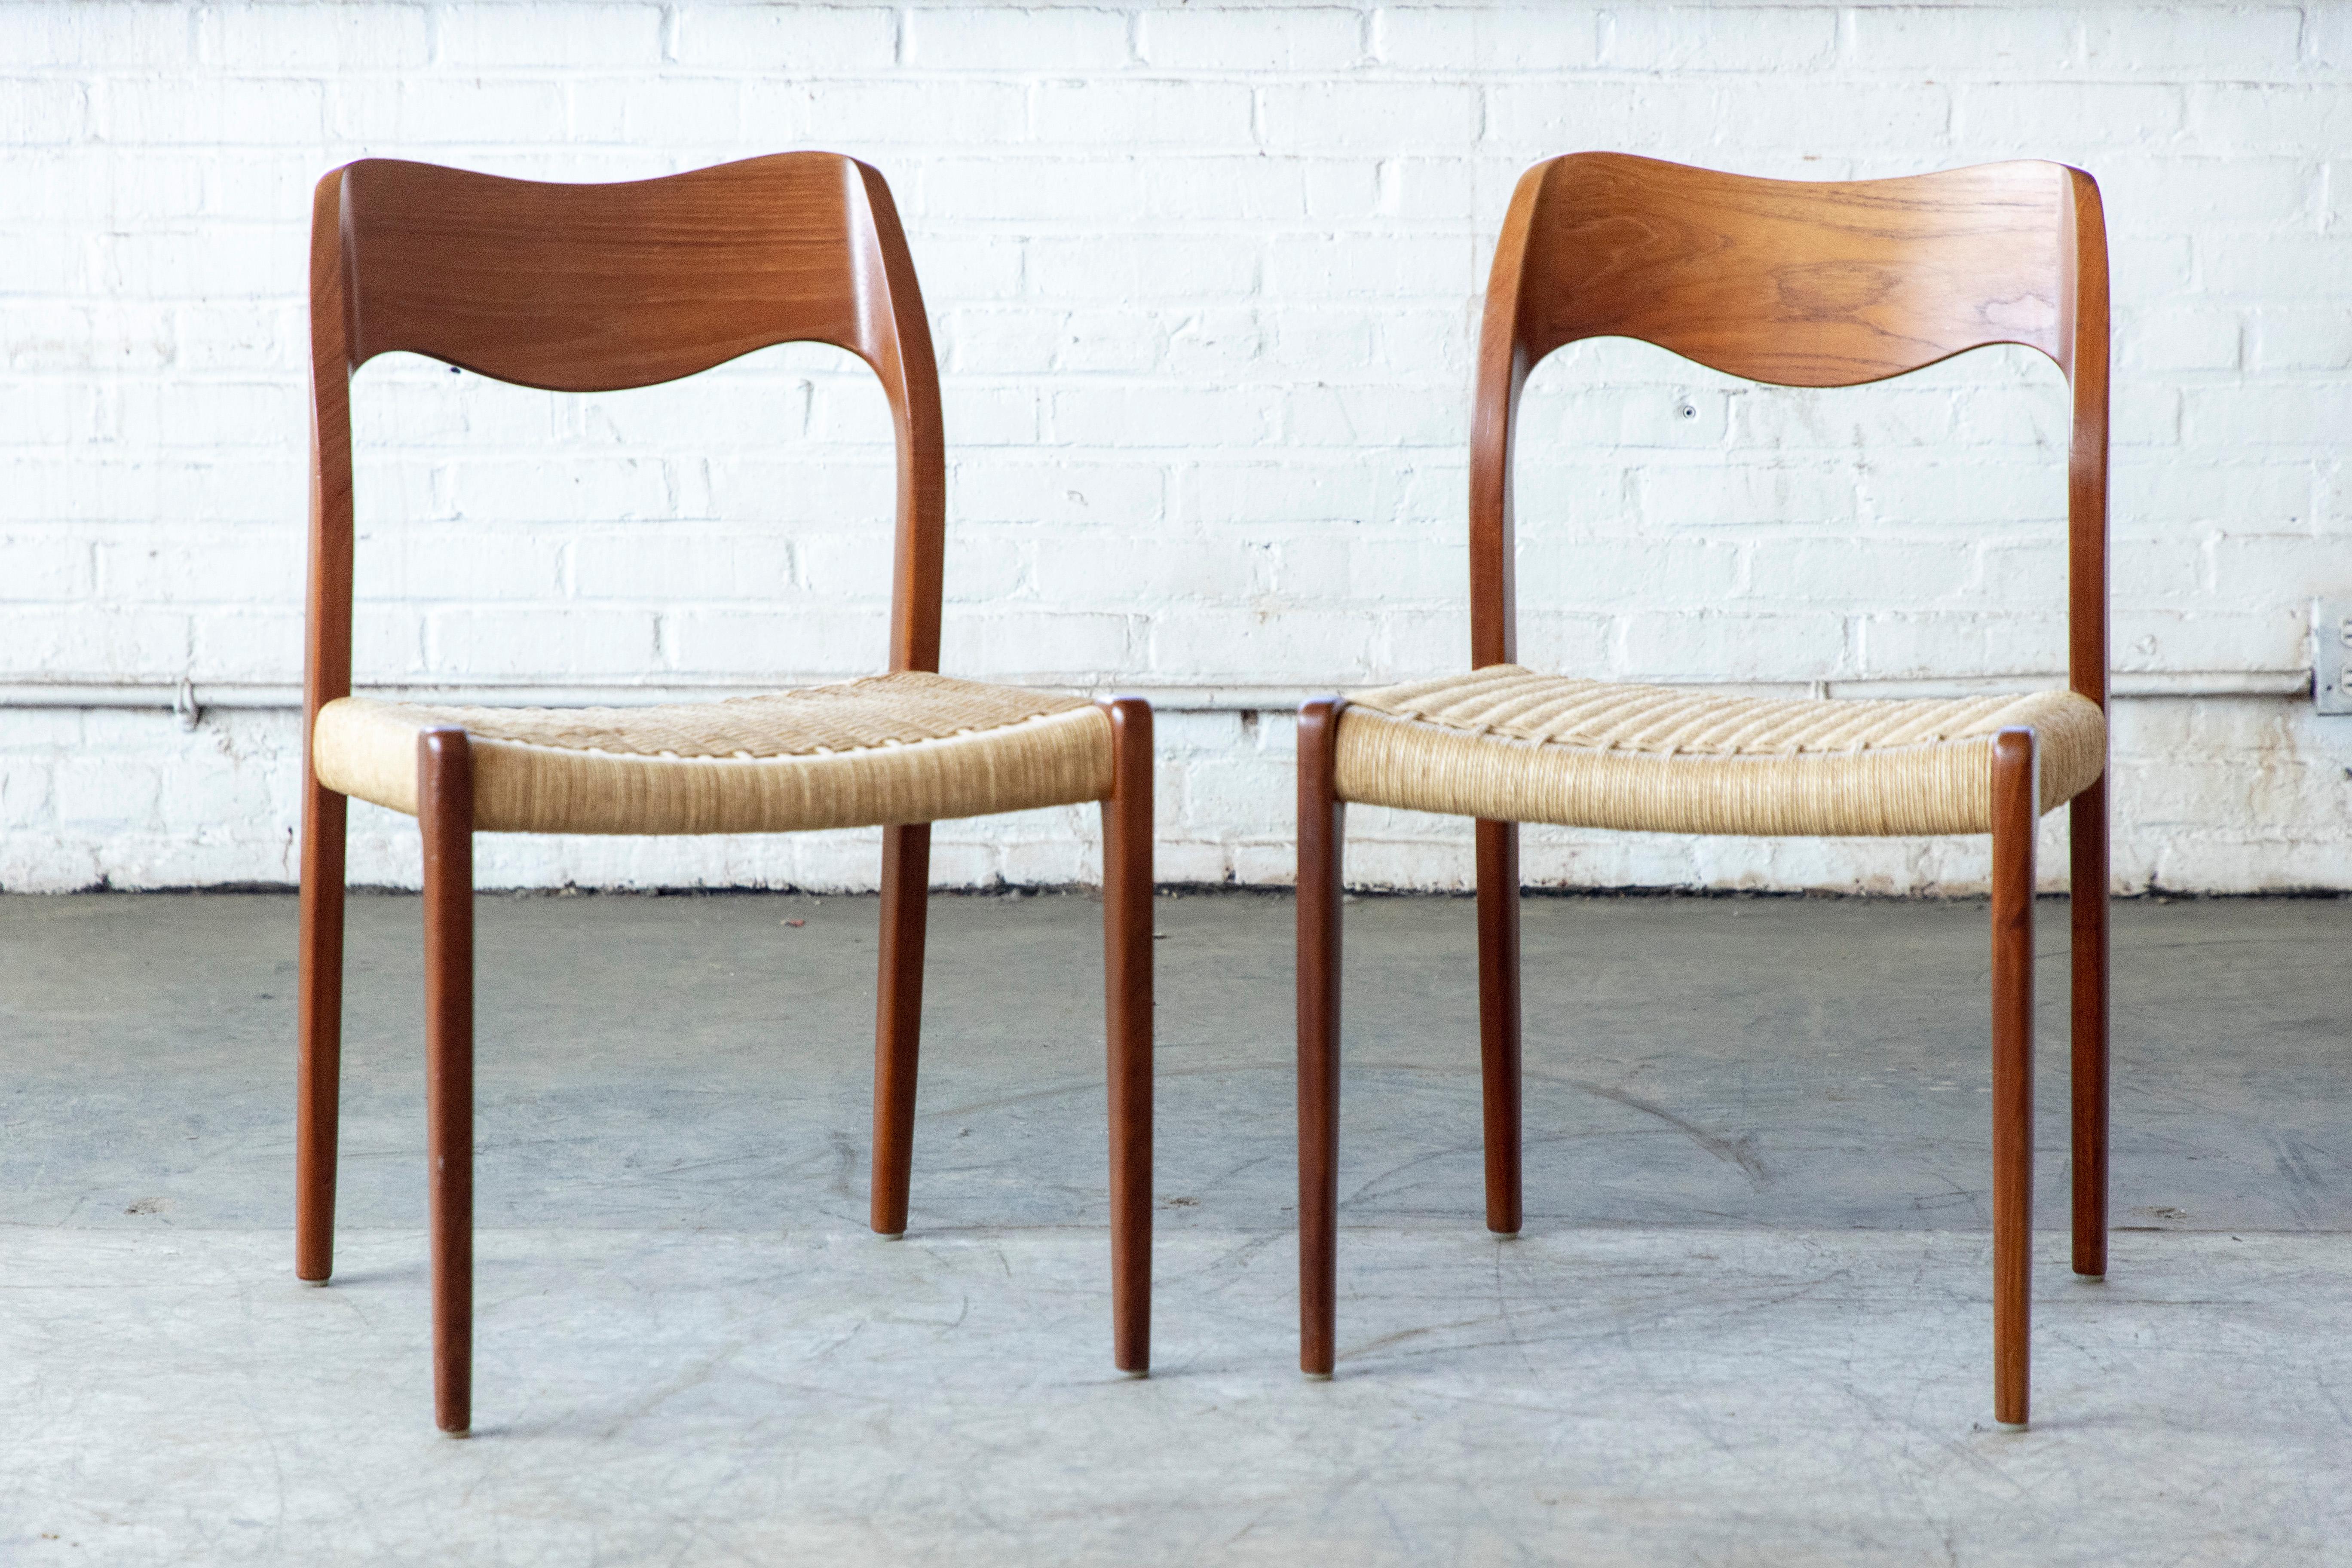 This pair of wonderful Danish modern teak armchairs Model 71 by NO Moller was designed in 1950's for J.L. Møllers Møbelfabrik. The chairs retain the original paper cord in very good condition. A truly classic midcentury Danish design to upgrade any